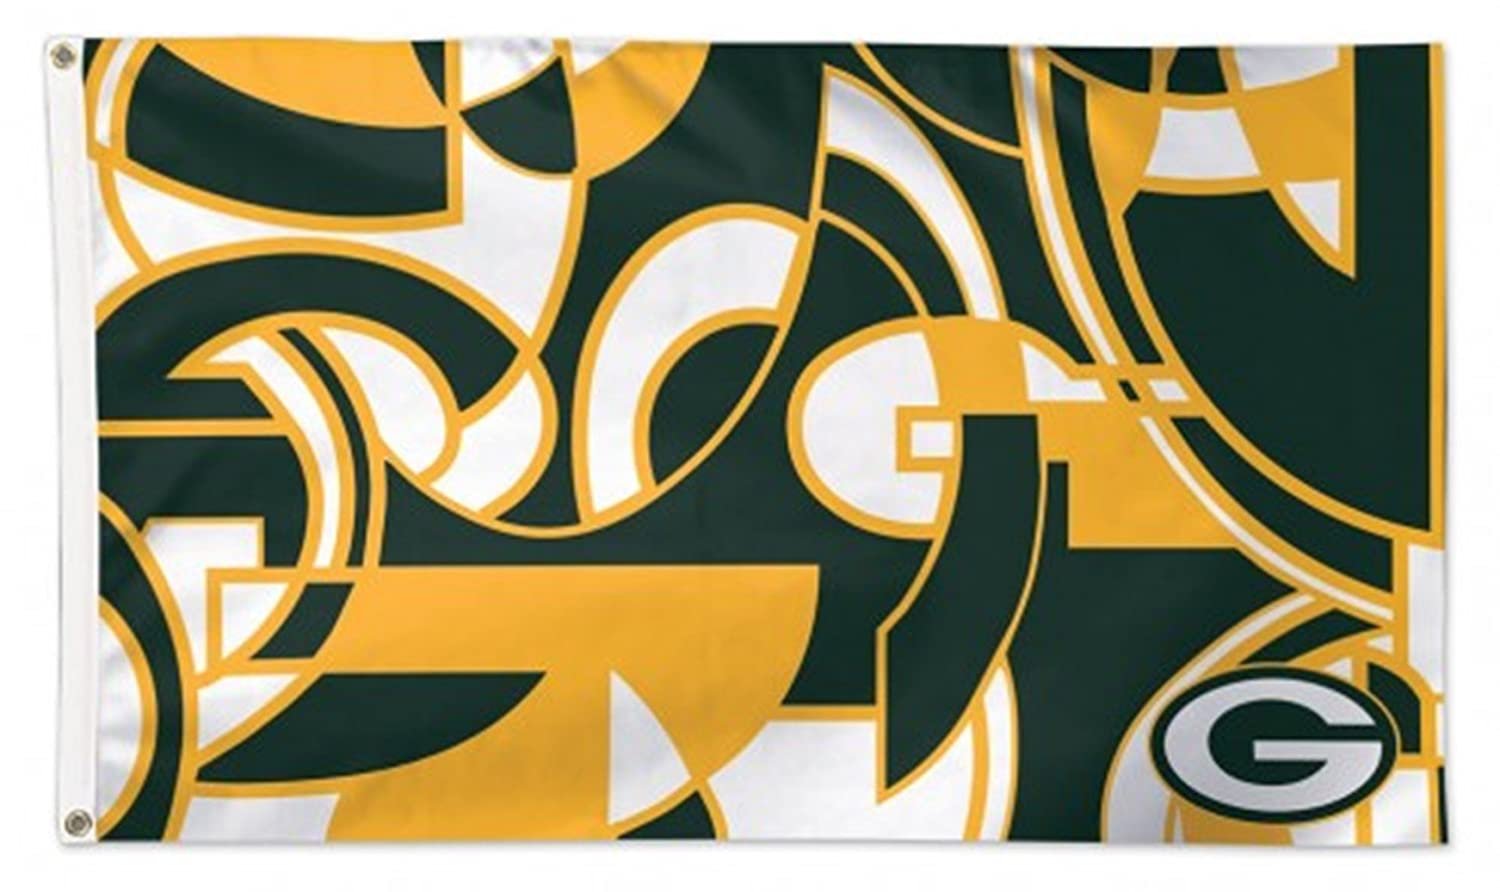 Green Bay Packers Premium 3x5 Feet Flag Banner, Xfit Design, Metal Grommets, Outdoor Use, Single Sided